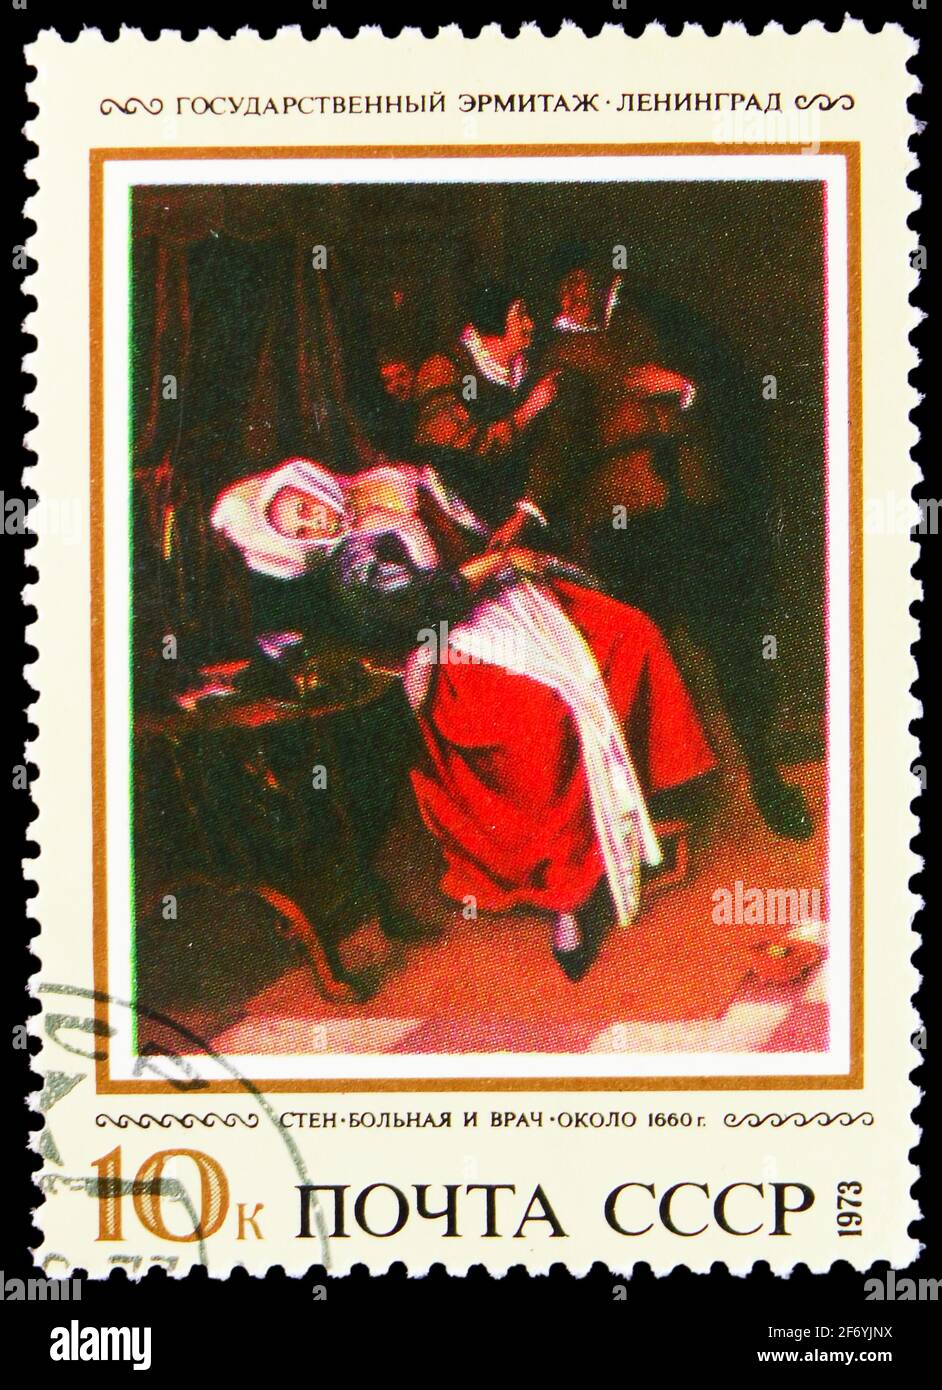 MOSCOW, RUSSIA - JANUARY 11, 2021: Postage stamp printed in USSR (Russia) shows Sick Woman and a Doctor, Jan Steen (1660's), Foreign Paintings in Sovi Stock Photo